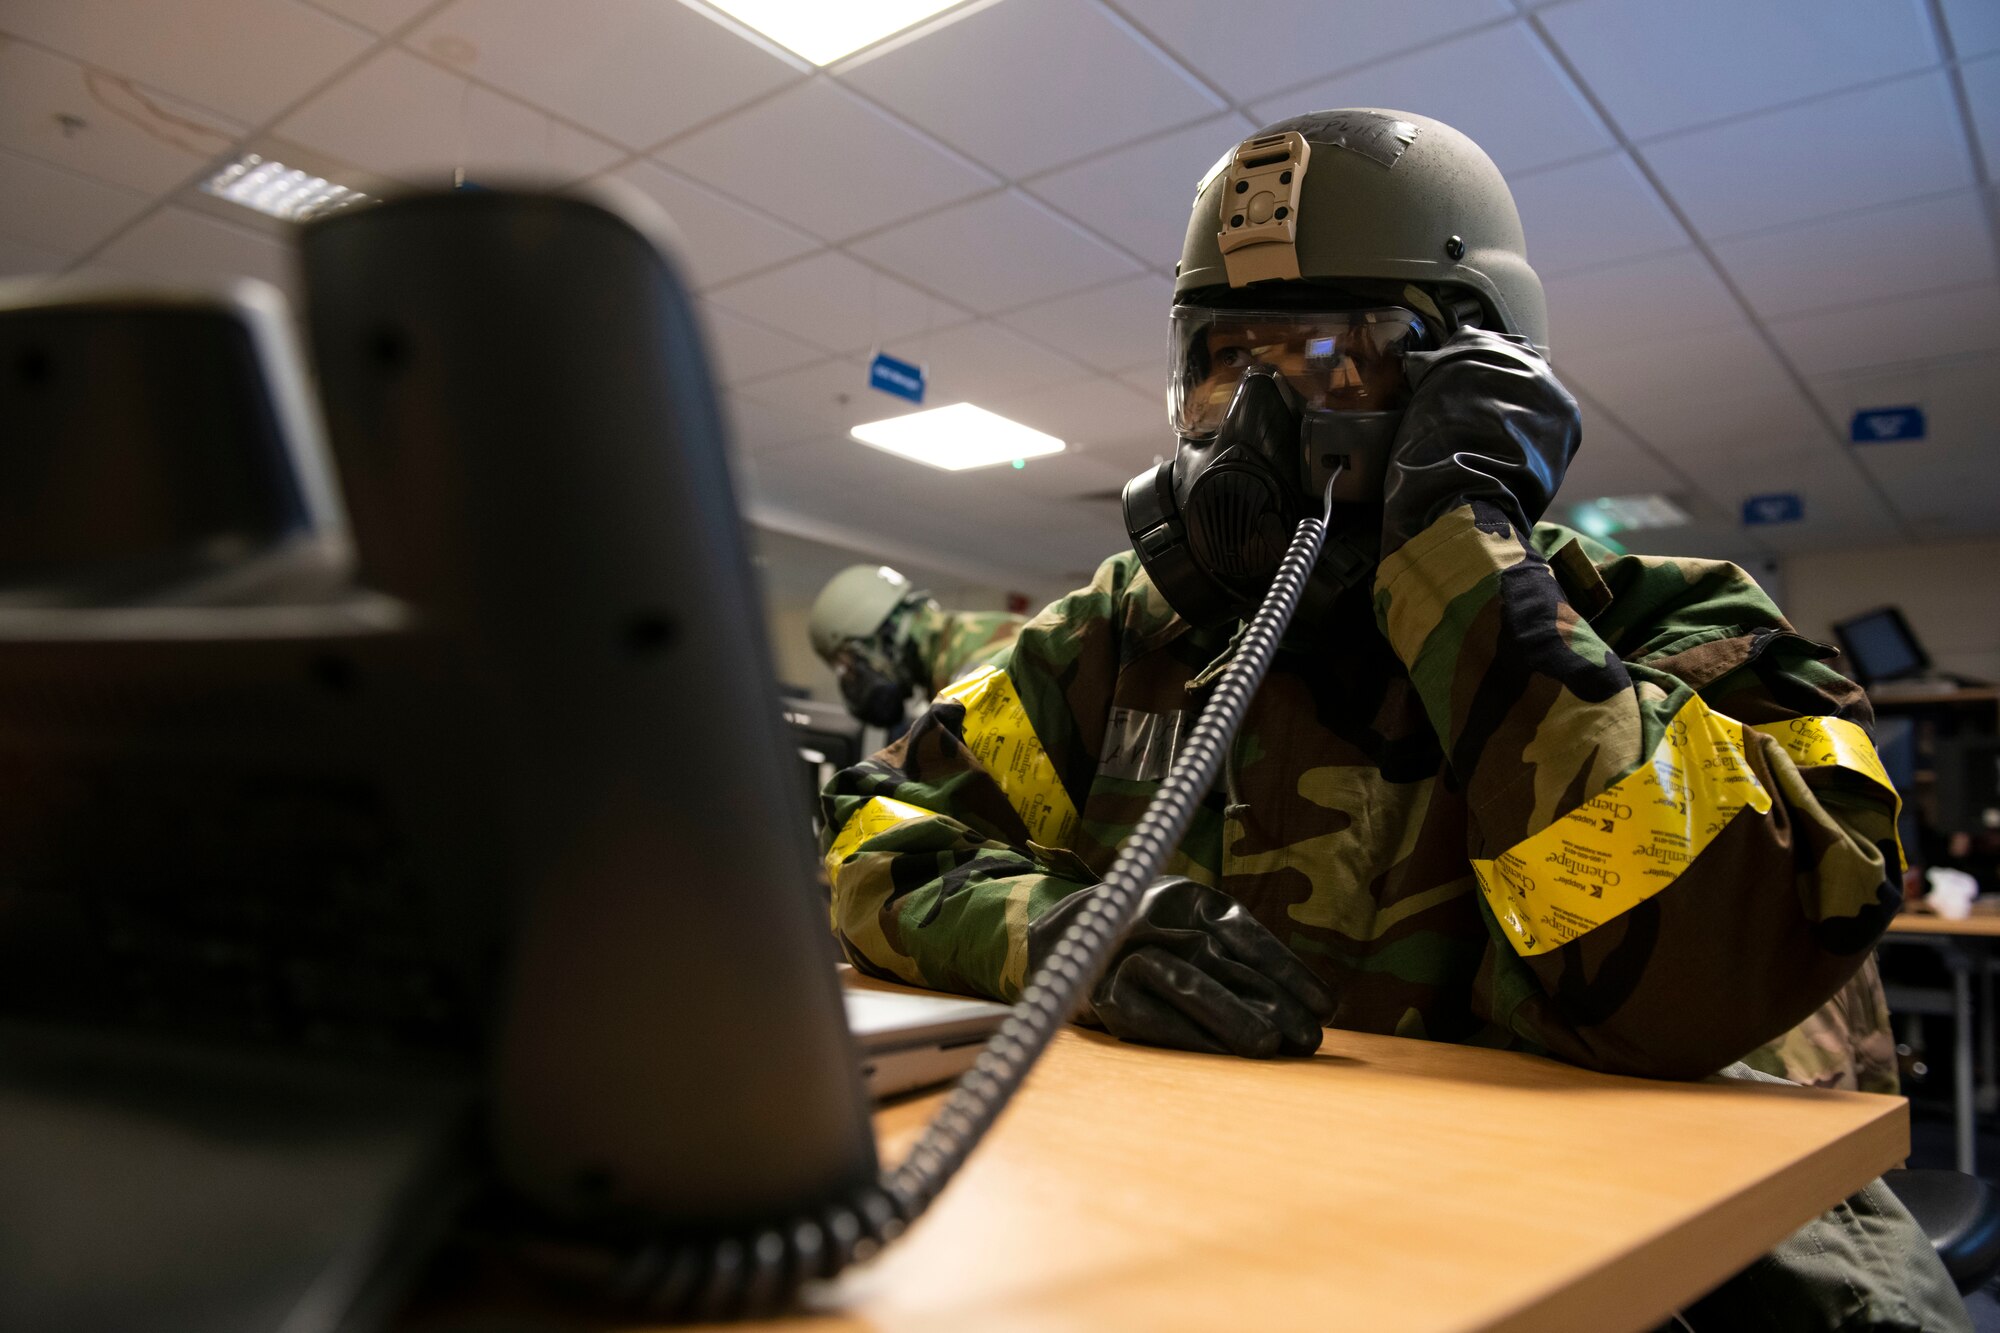 A member of the Emergency Operations Center works during an exercise at RAF Alconbury, England, Nov. 17, 2022. The EOC is the command and control hub for emergency operations on base. Airmen across the 501st Combat Support Wing took part in a readiness exercise to test various capabilities, identify areas for improvement and strengthen operations. (U.S. Air Force photo by Senior Airman Jennifer Zima)